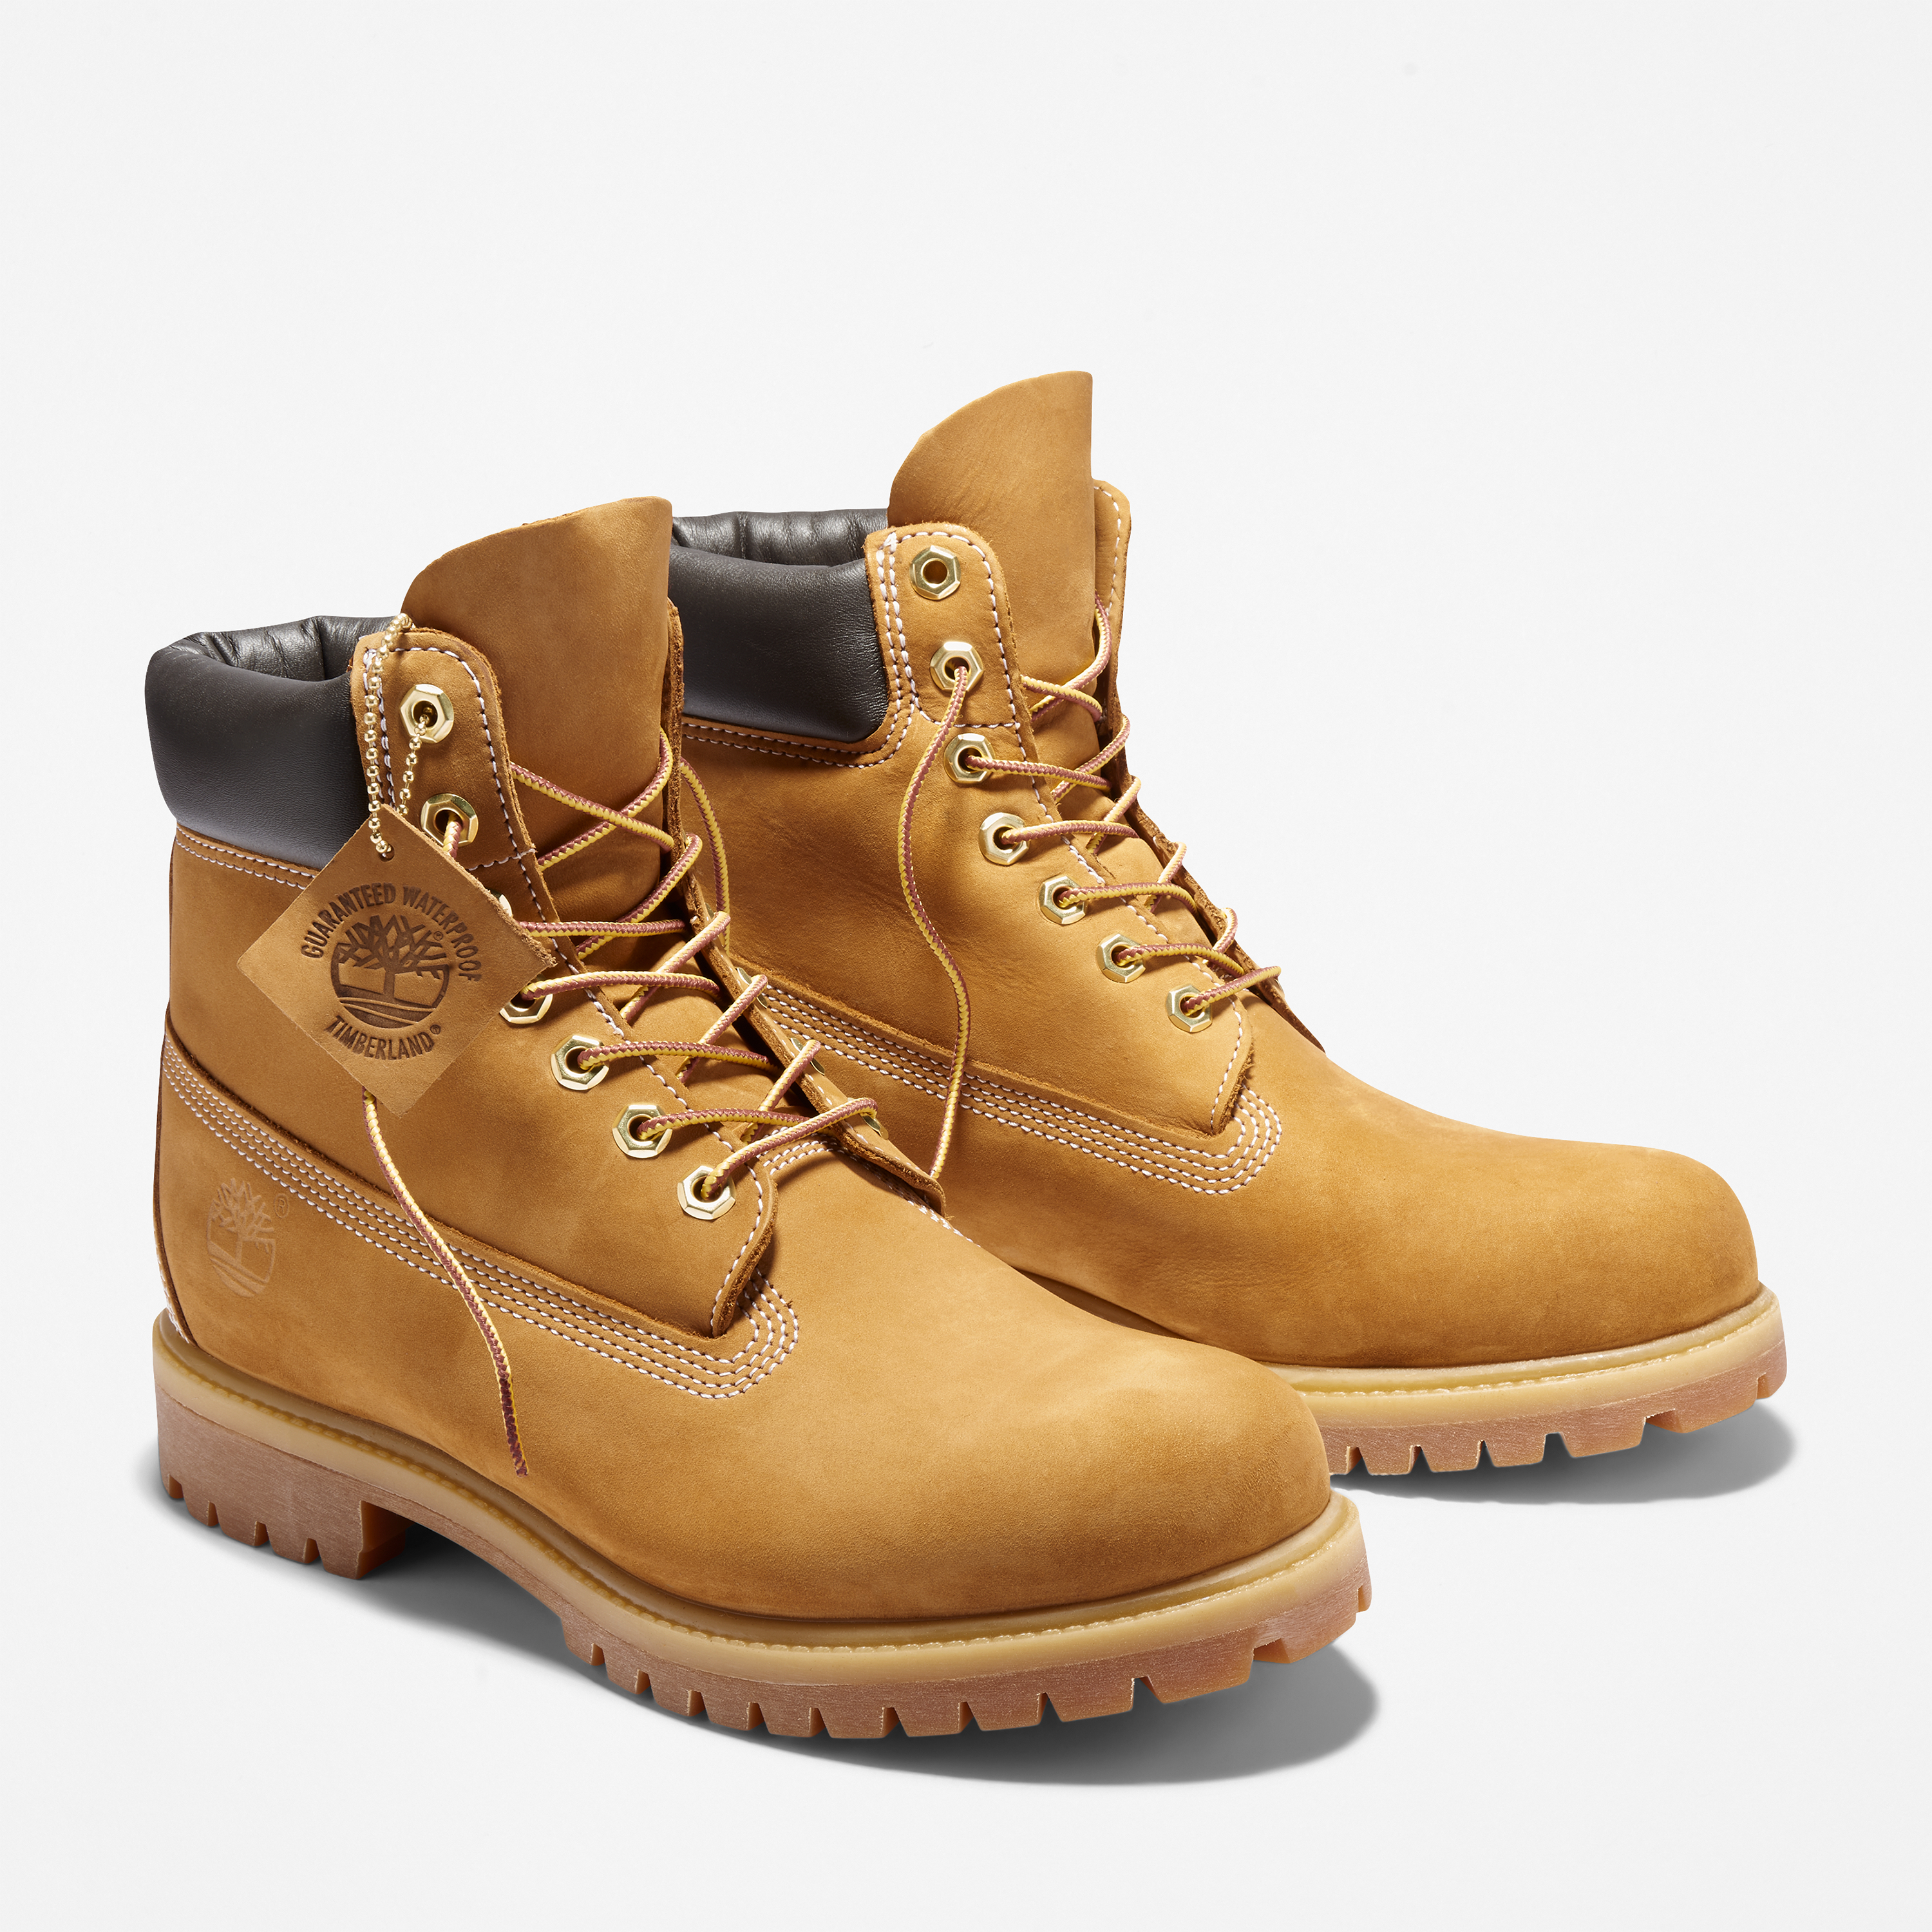 | Five Original Launch Timberland® Future73 Boot Wire With Timberland of Decades the of Business Marks